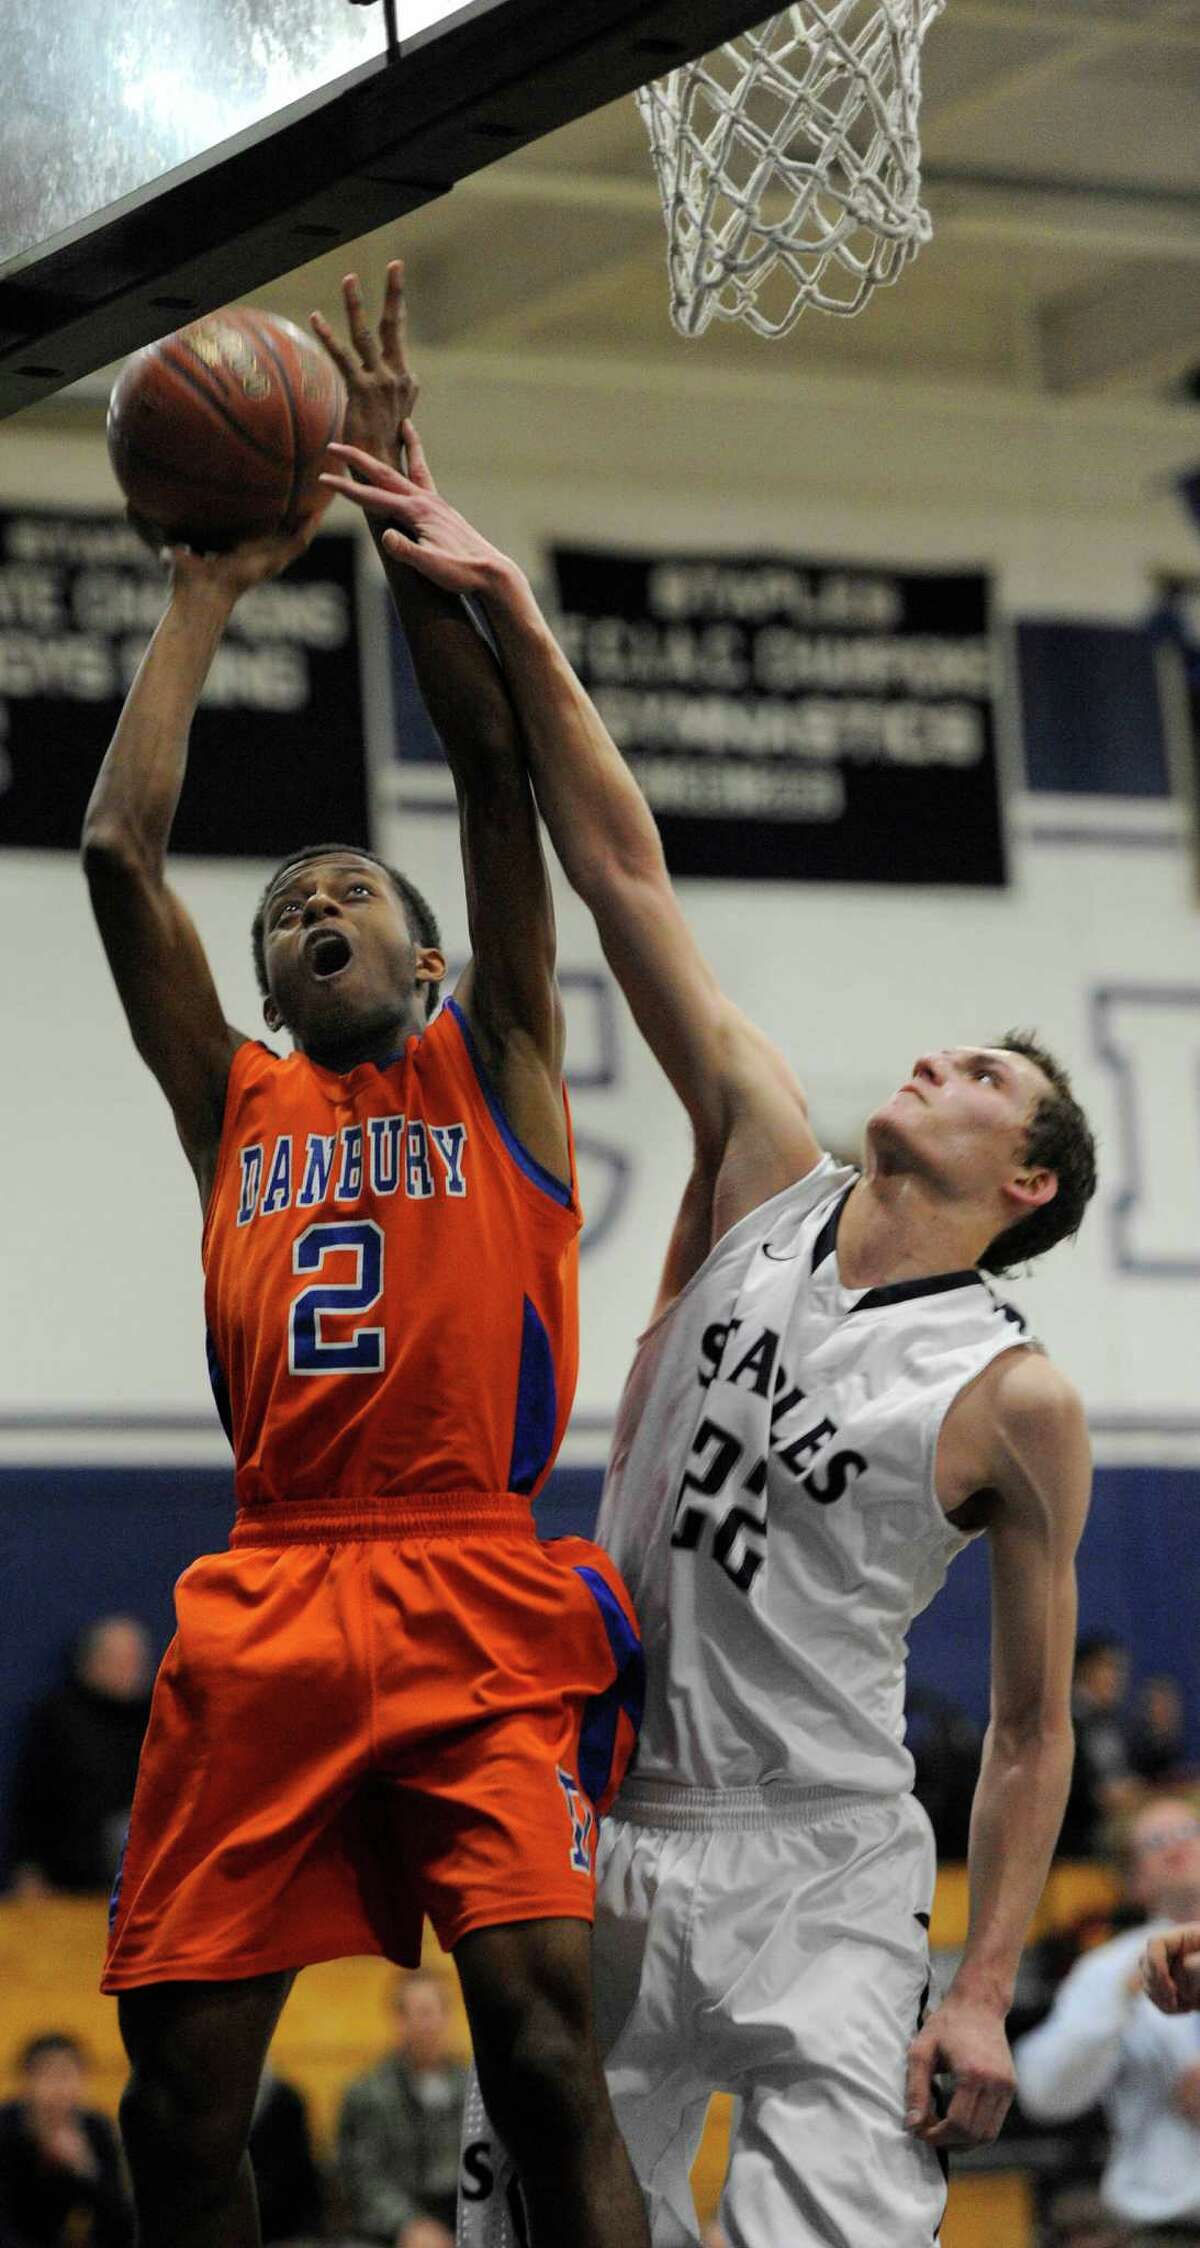 Staples high school's Nick Esposito tries to stop Danbury high school's Elijah Duffy from scoring a layup during a boys basketball game played at Staples, Westport, CT on Wednesday, December,18th, 2013.